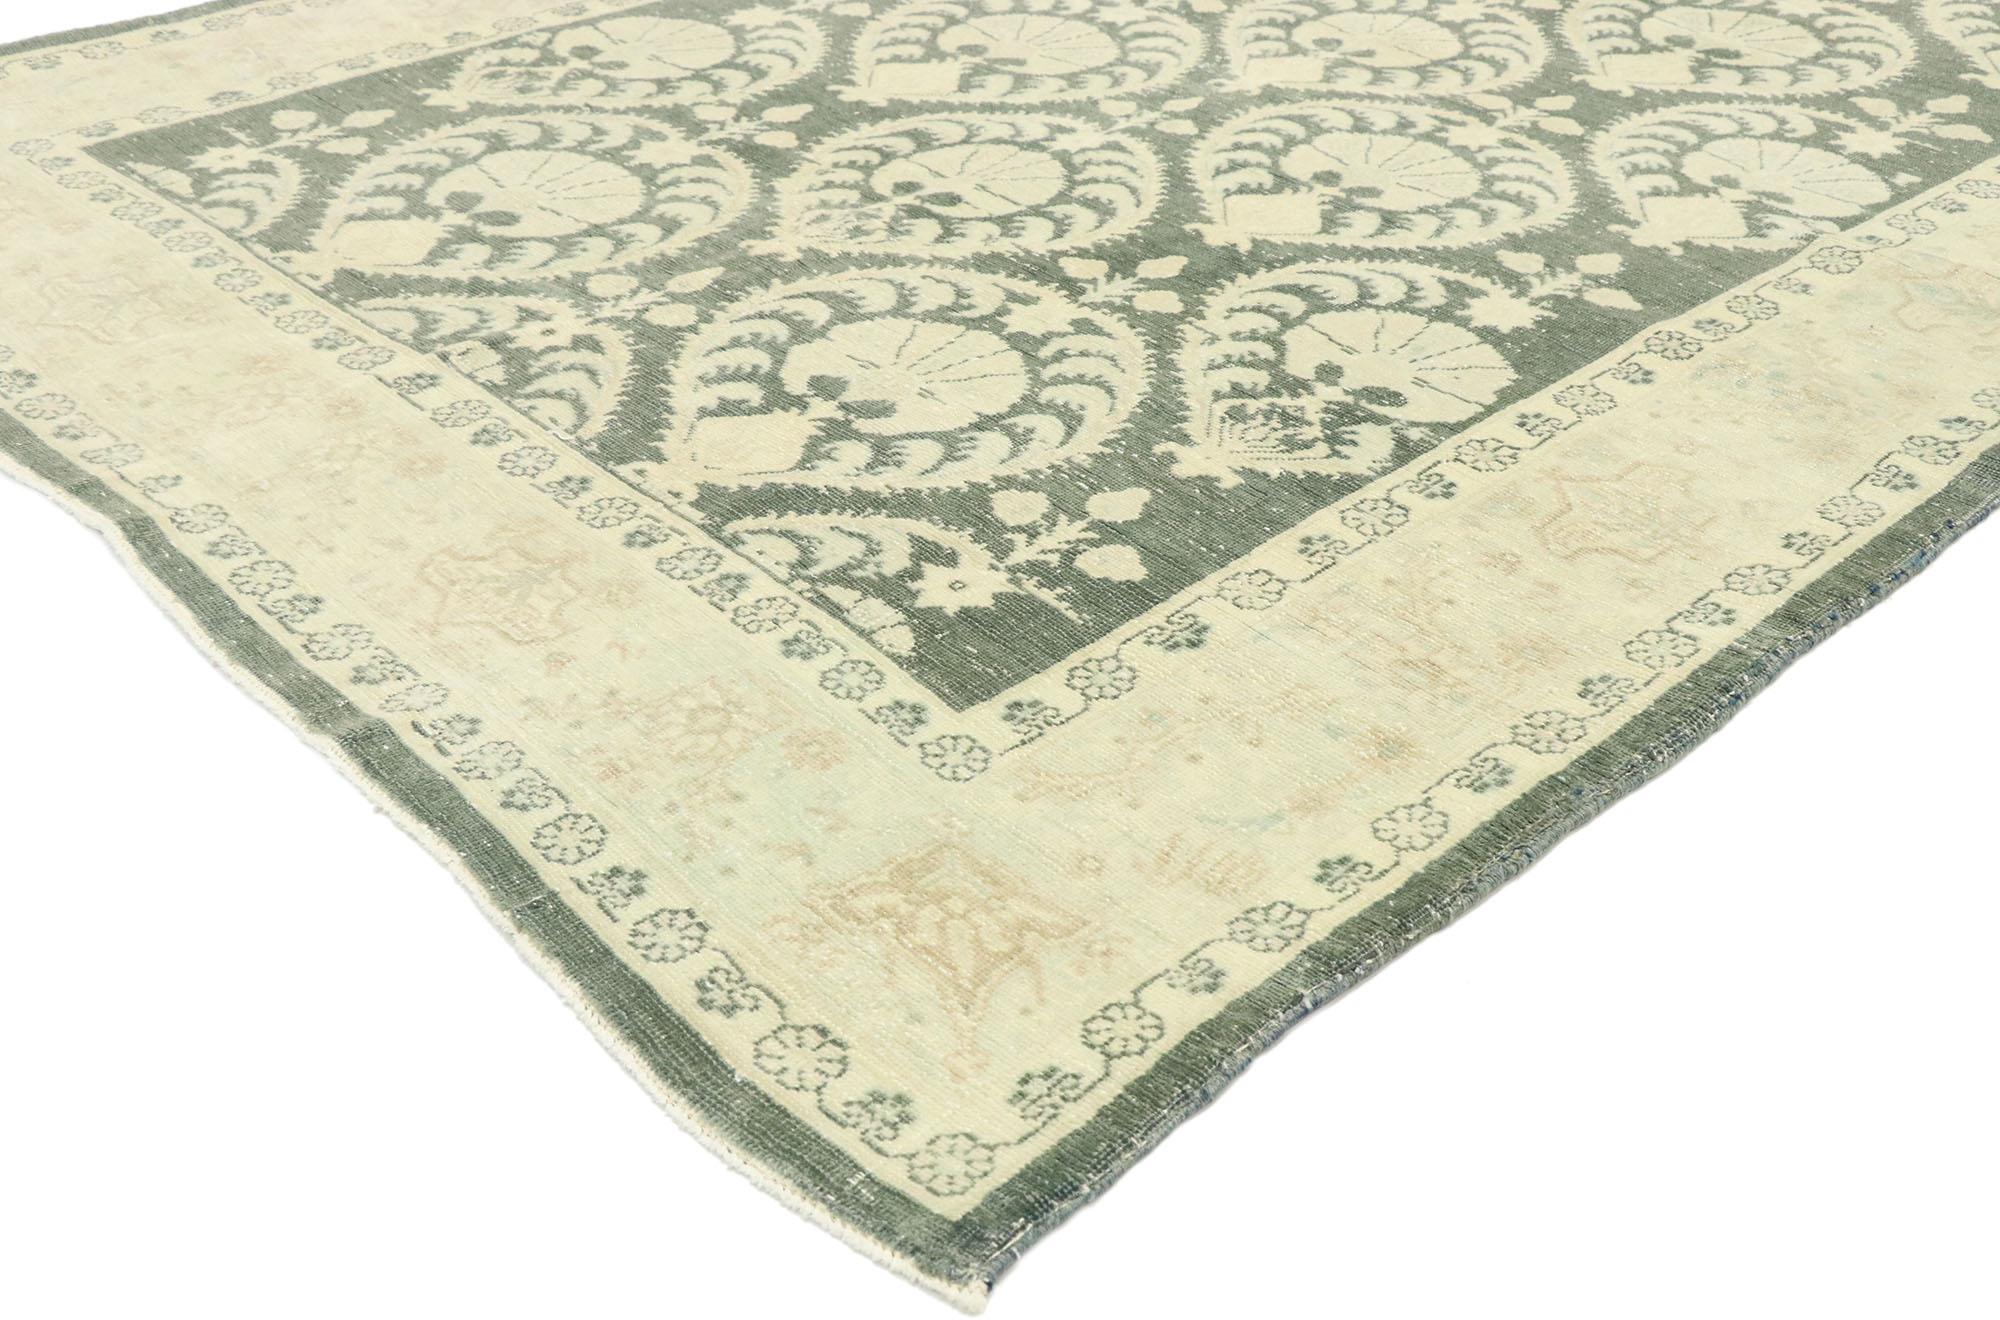 53033, distressed vintage Romanian Rug inspired by William Morris with Arts & Crafts style. Reminisce of 19th century French designs and decorative elegance, this hand knotted wool distressed vintage Romanian gallery rug beautifully embodies Arts &